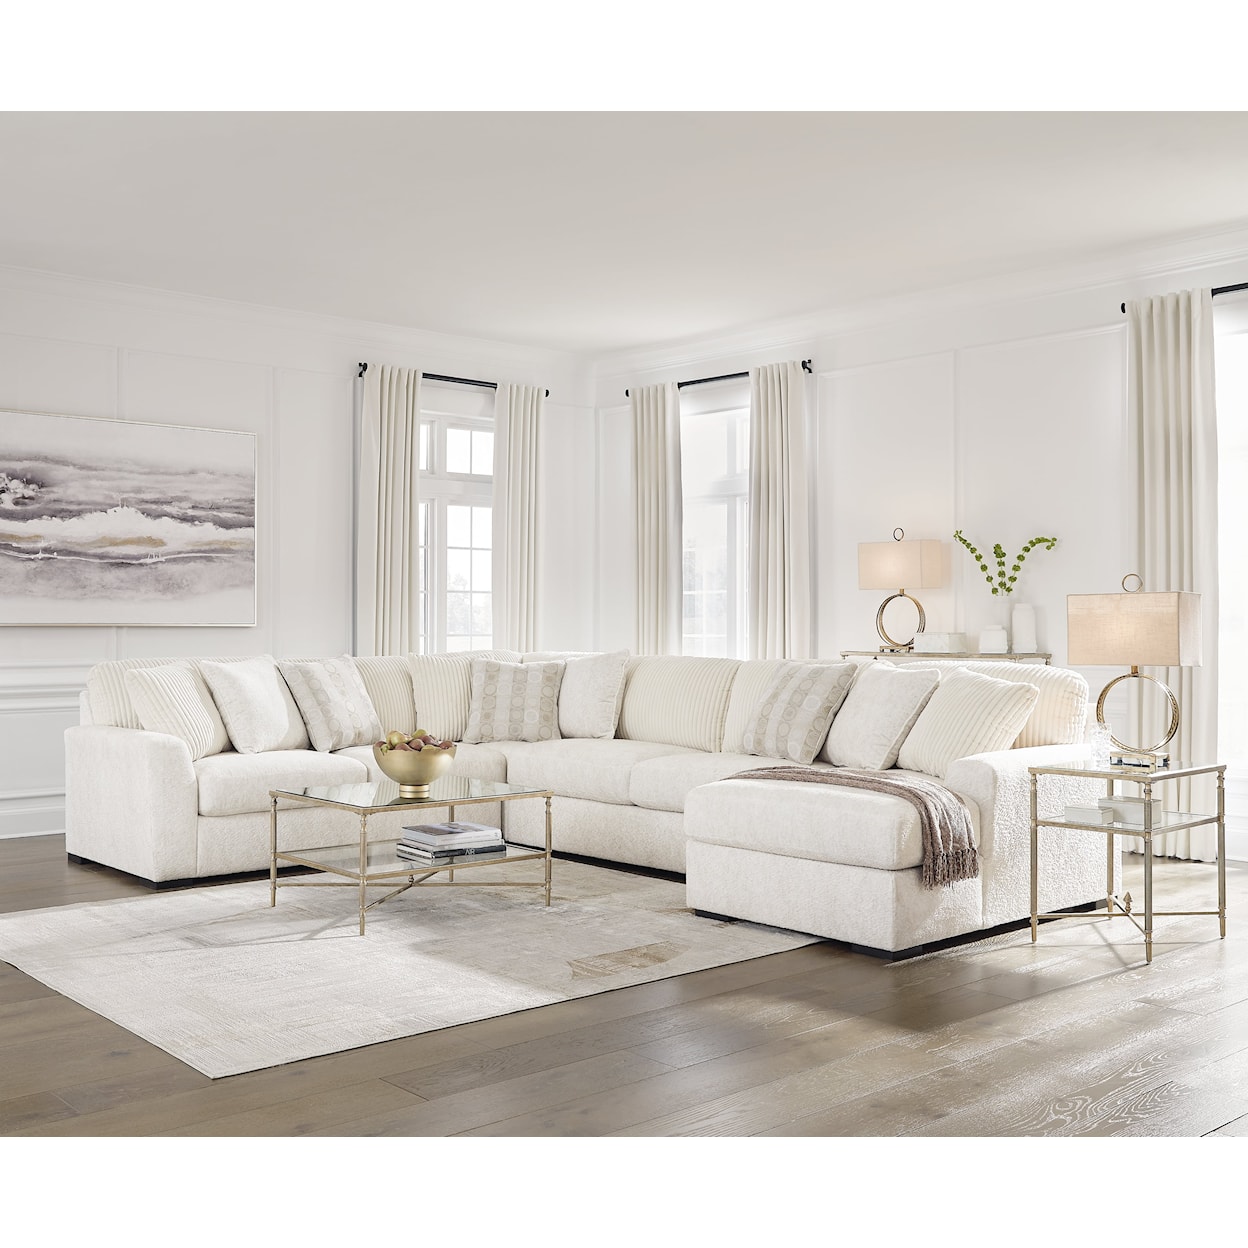 Signature Design Chessington 4-Piece Sectional With Chaise